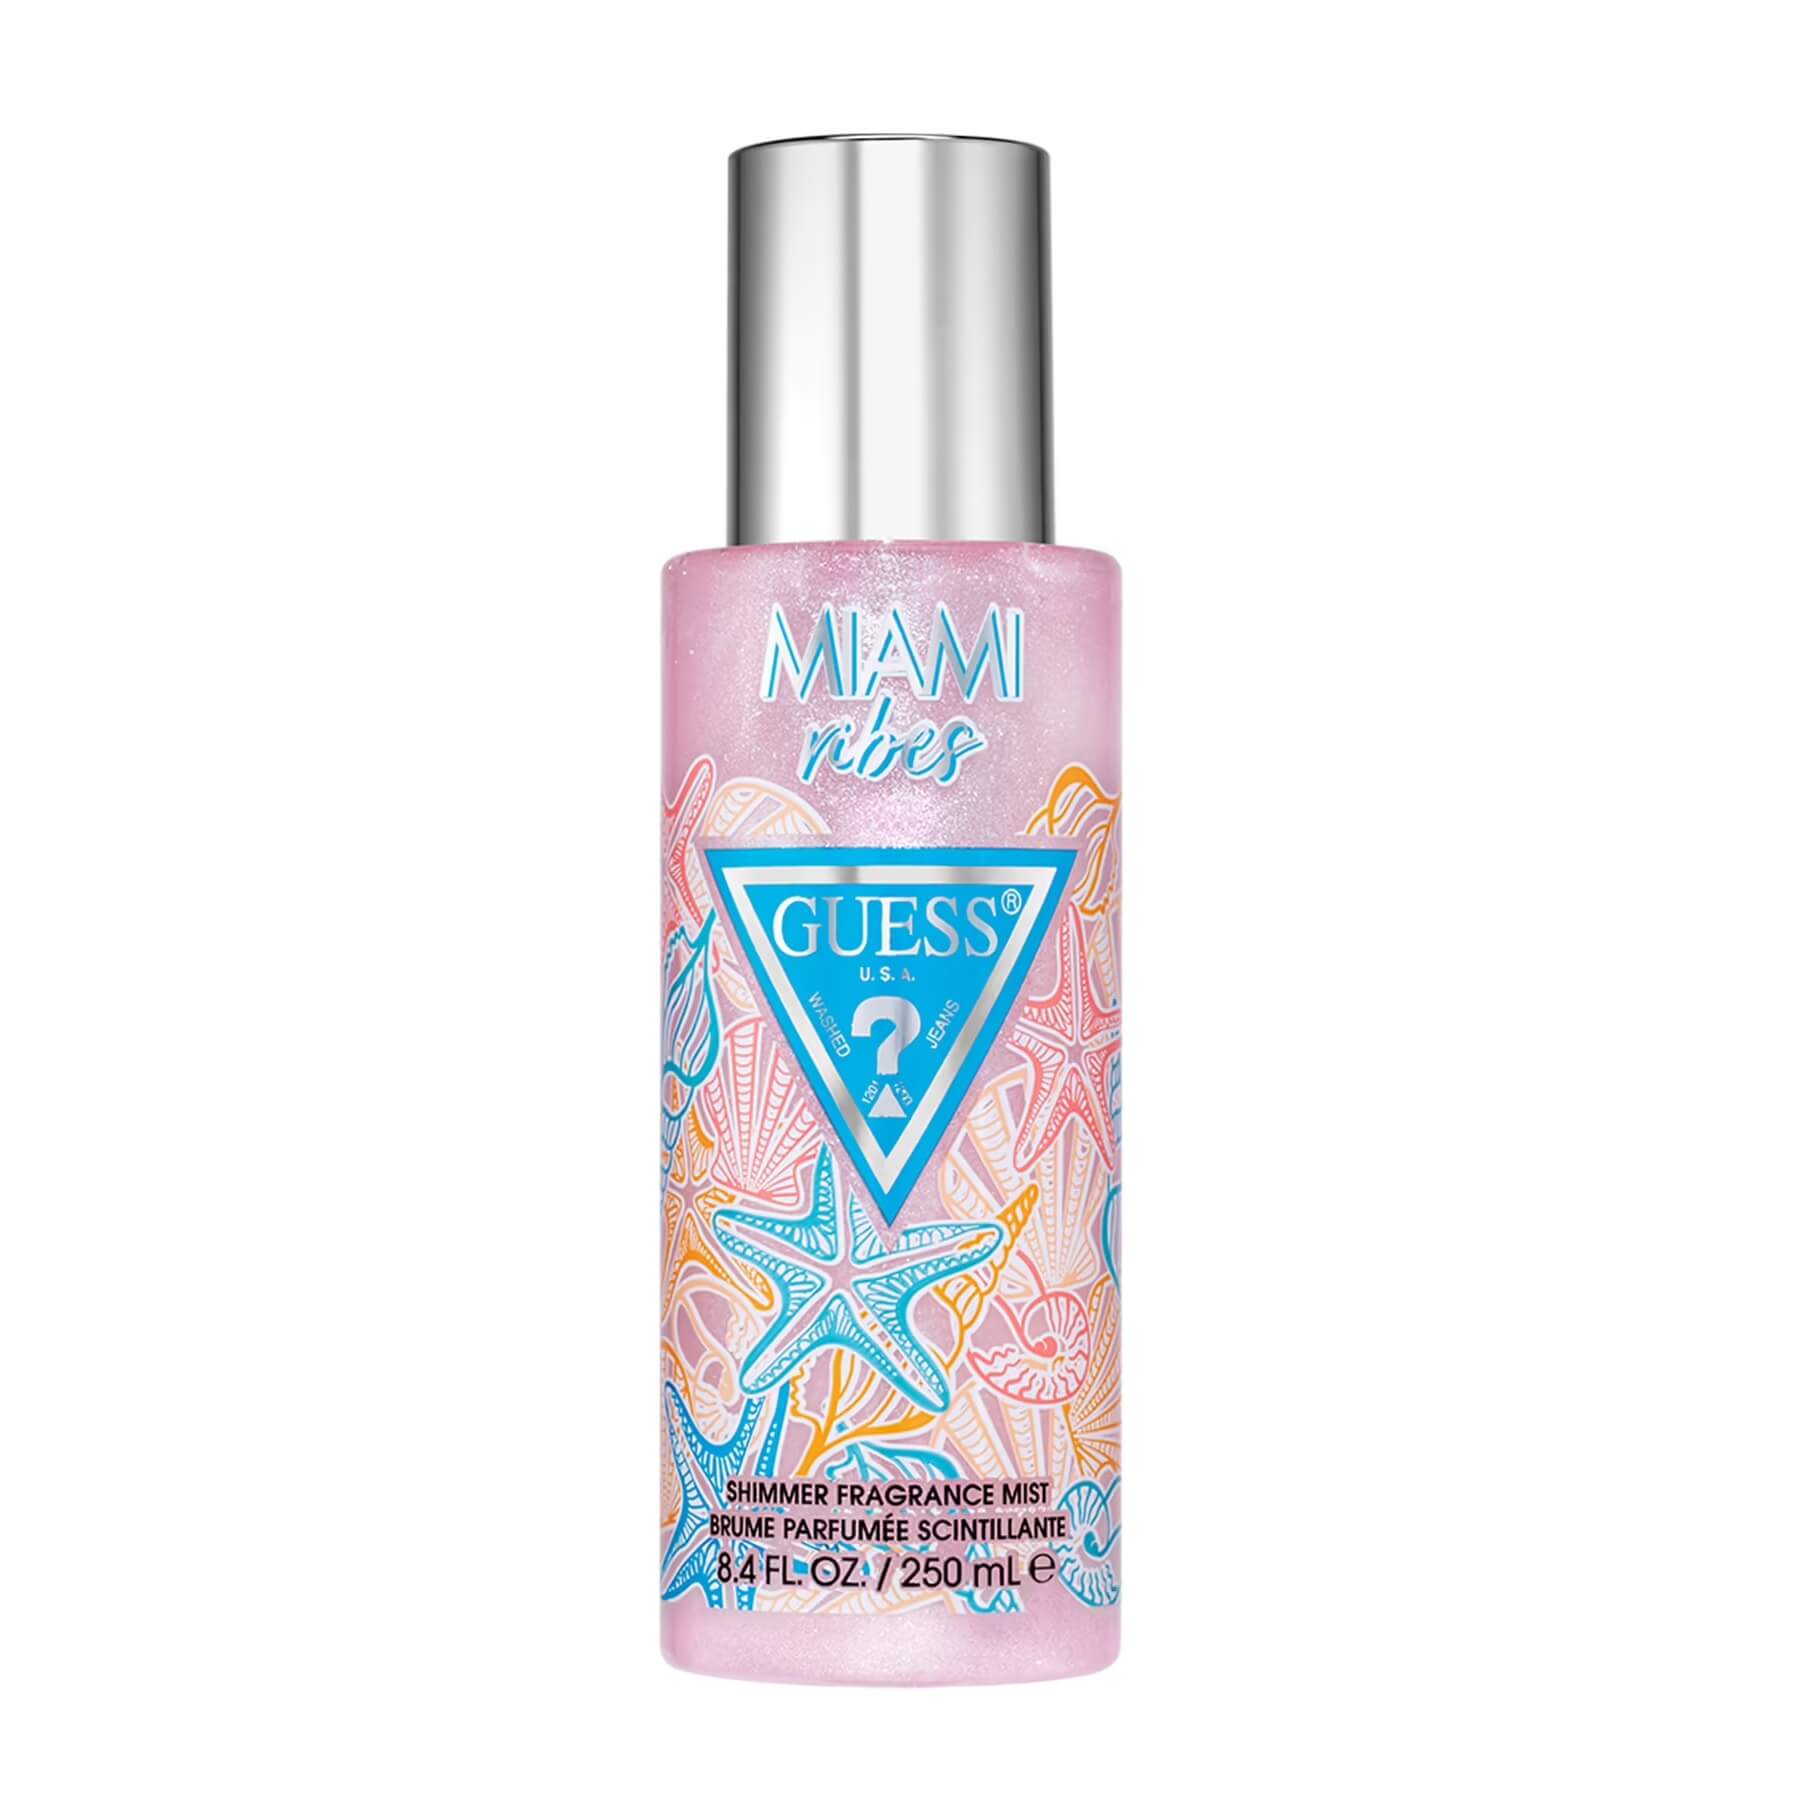 guess miami vibes body mist